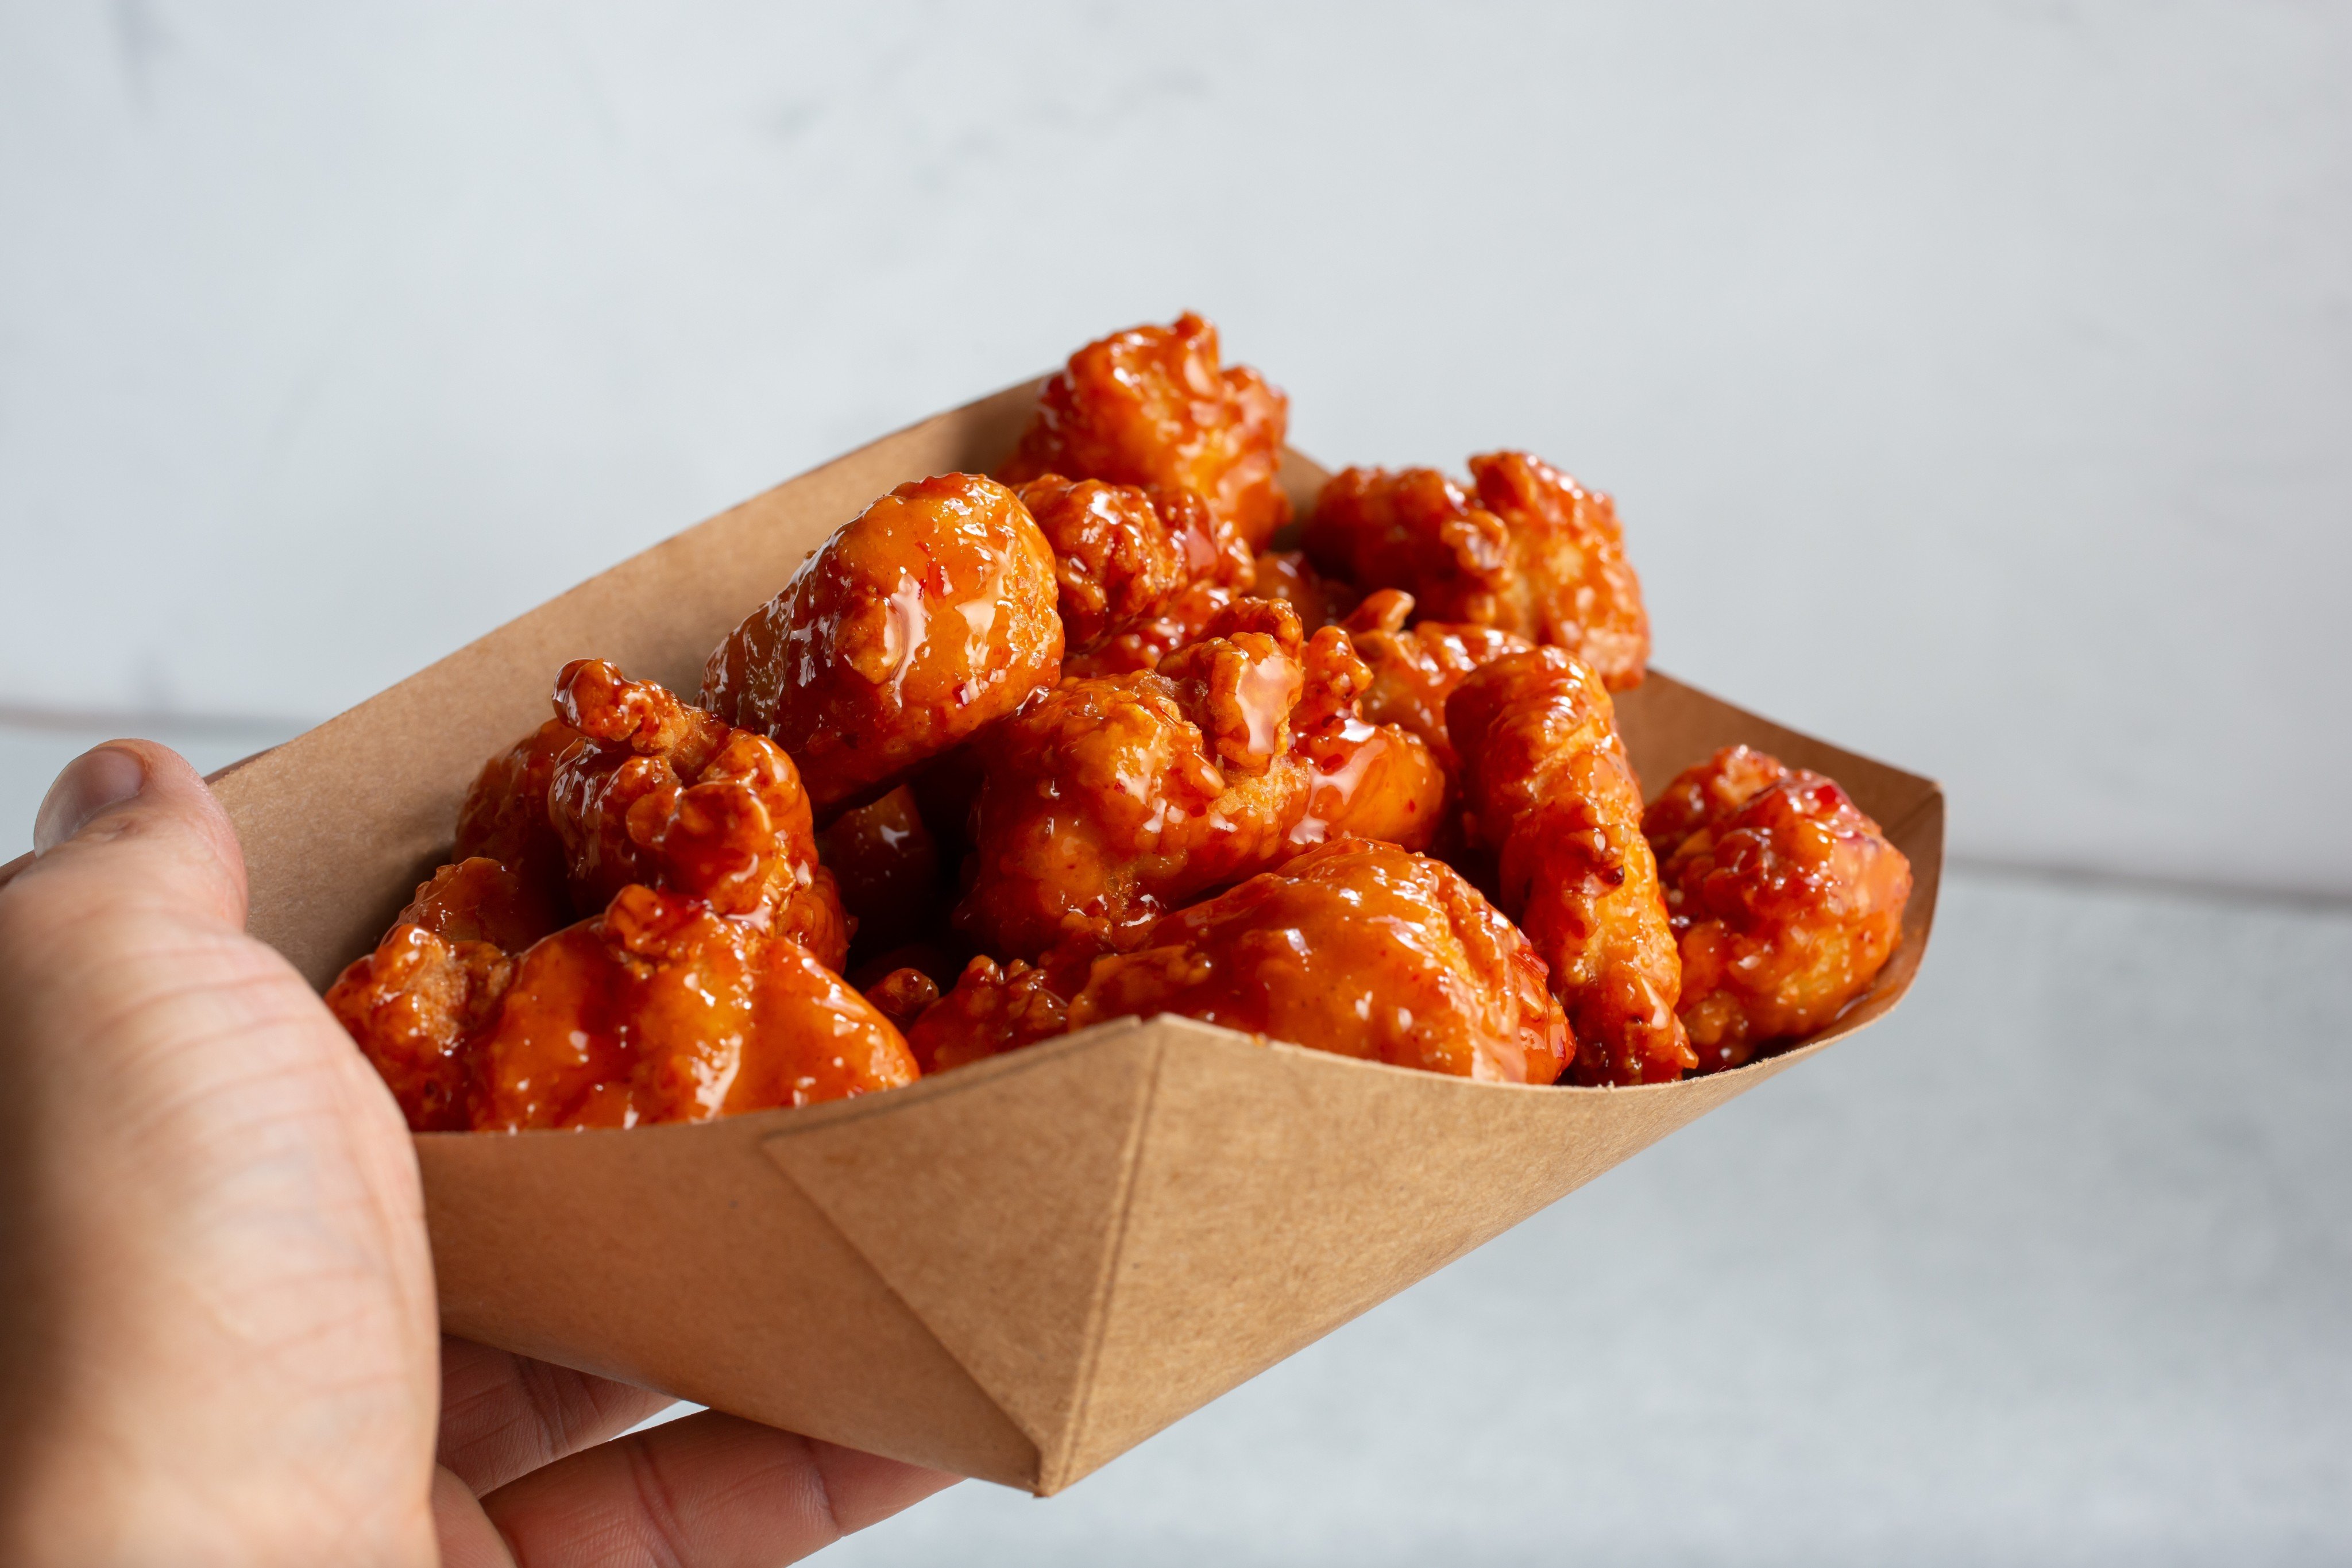 So-called “boneless chicken wings” are actually nuggets of boneless, skinless breast meat. Photo: Shutterstock